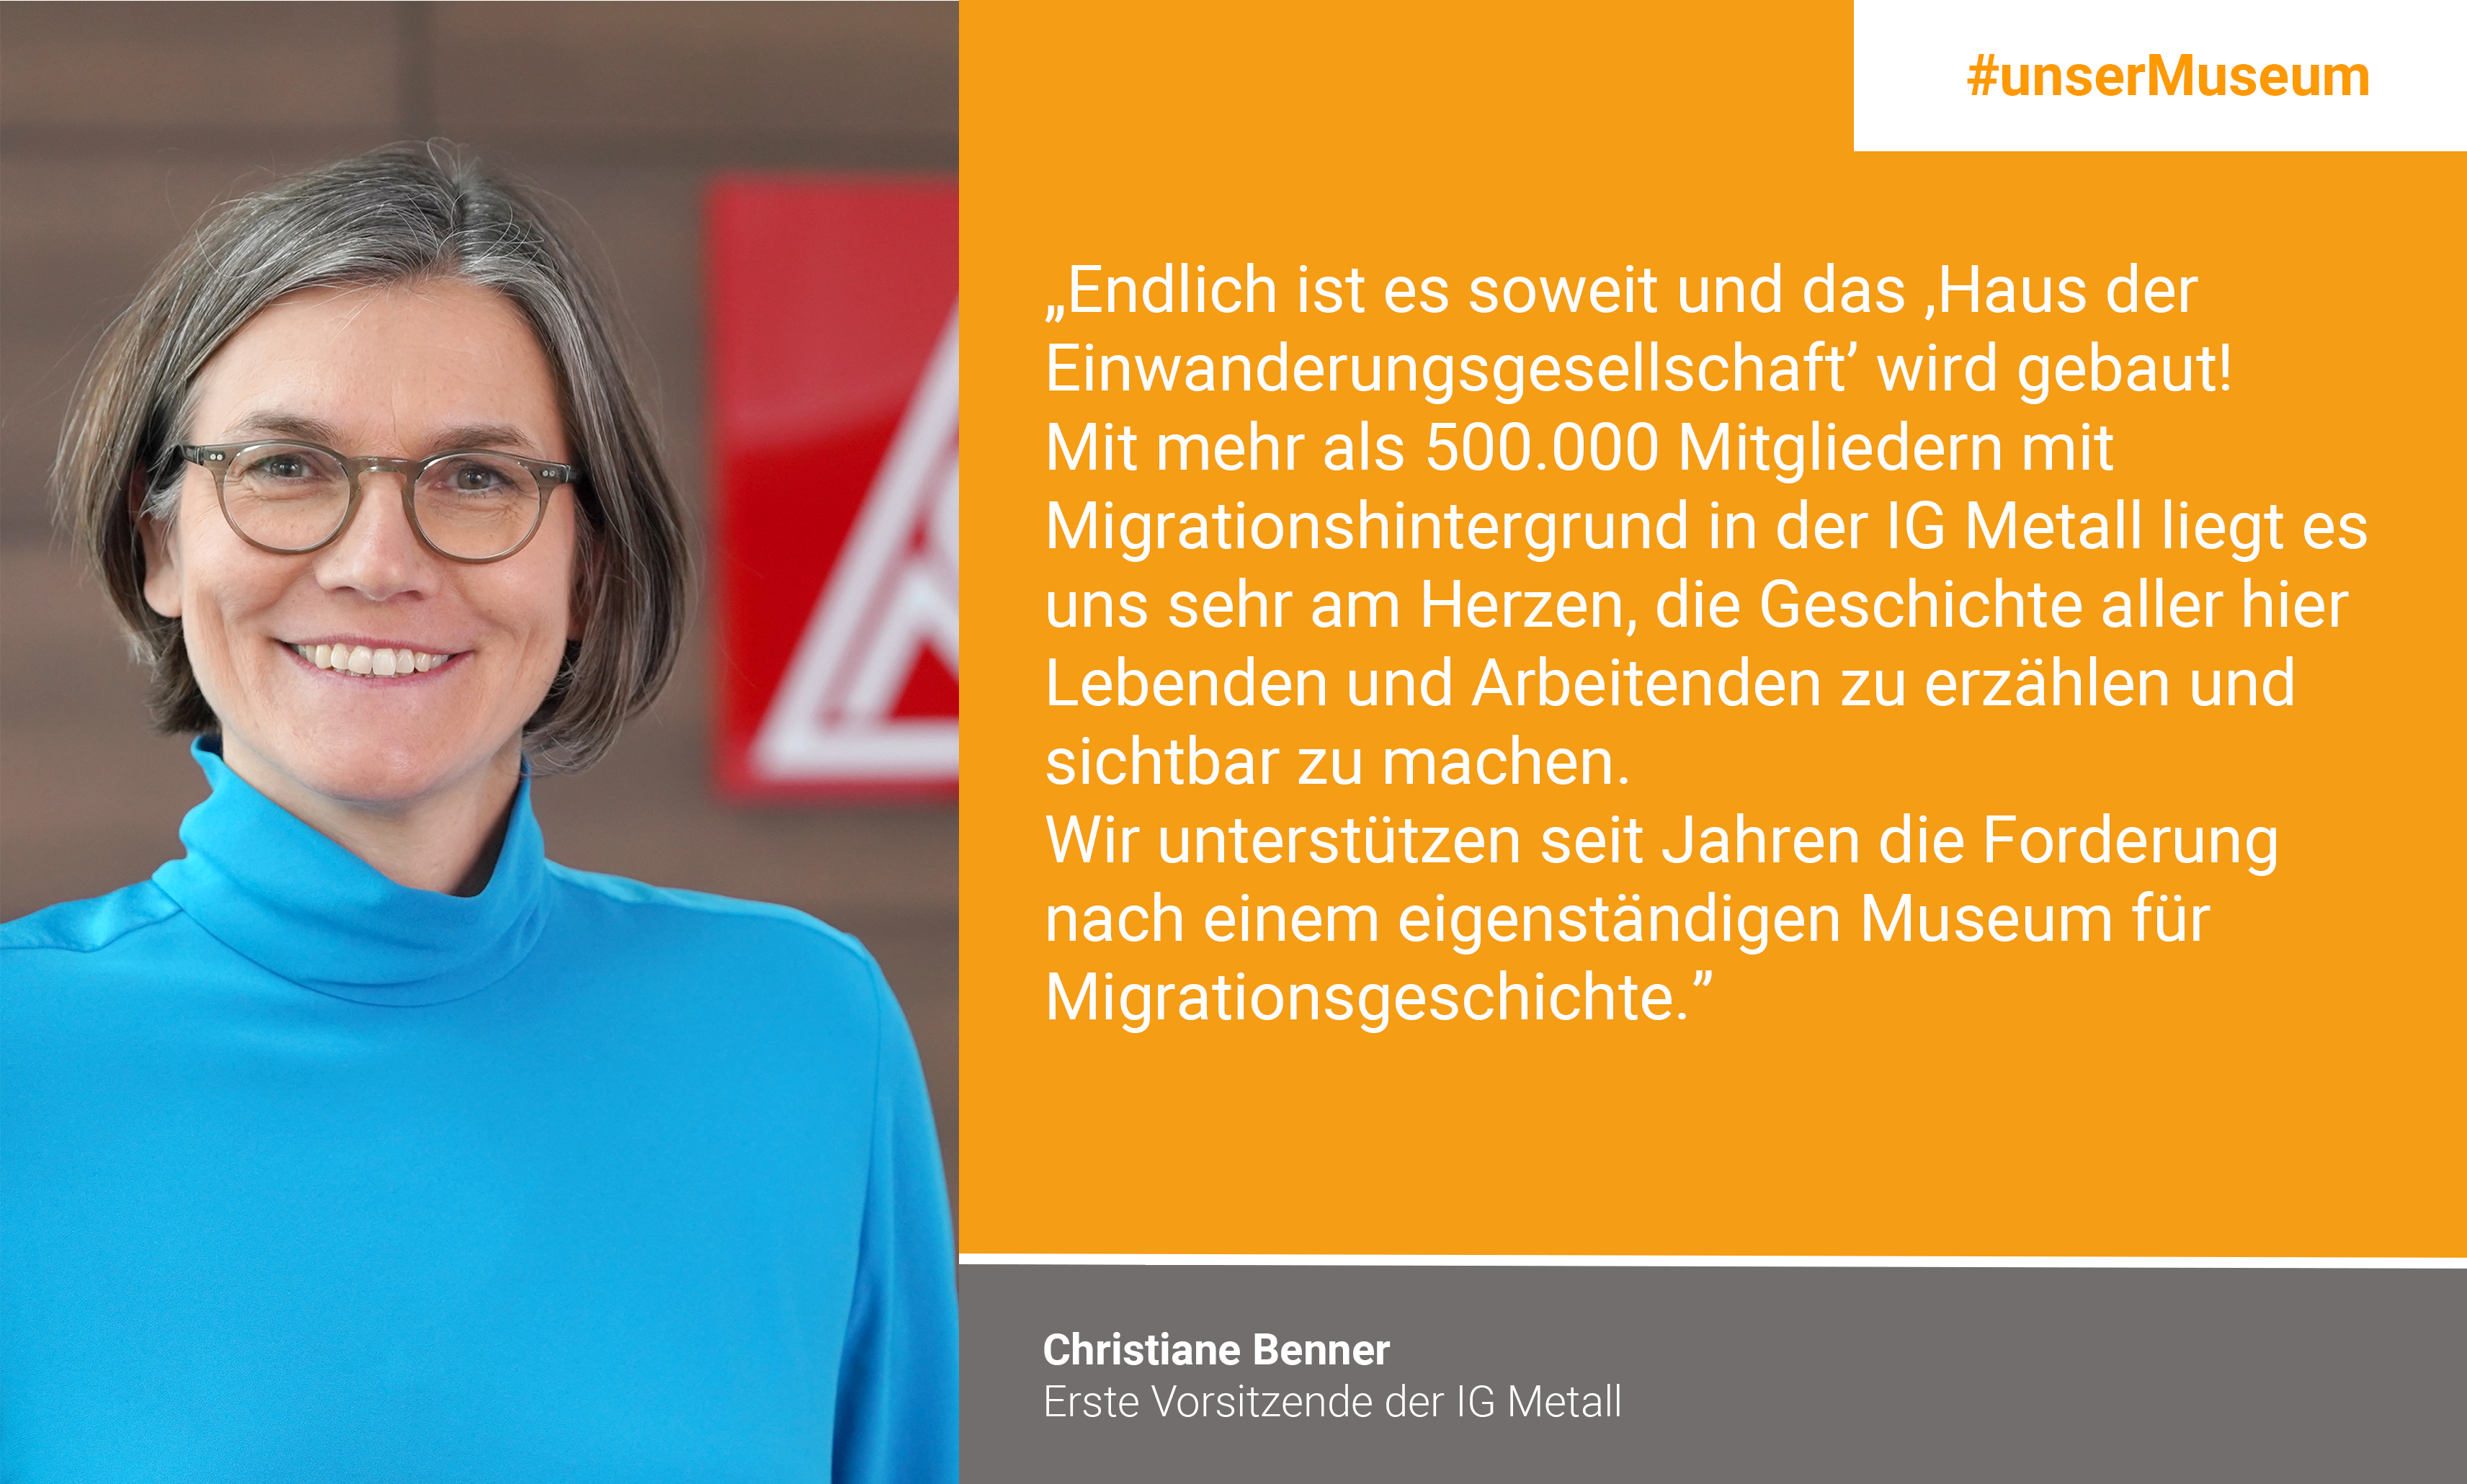 Christiane Benner, First chair person IG Metall: "Finally the time has come and "das Haus der Einwanderungsgesellschaft" (the house of immigration society) is being built! With more than 500,000 members with a migration background in the IG Metall, it is very important to us to tell and visualize the history of all people who are living and working here. For years, we have been supporting the demand for an independent museum for the history of migration."